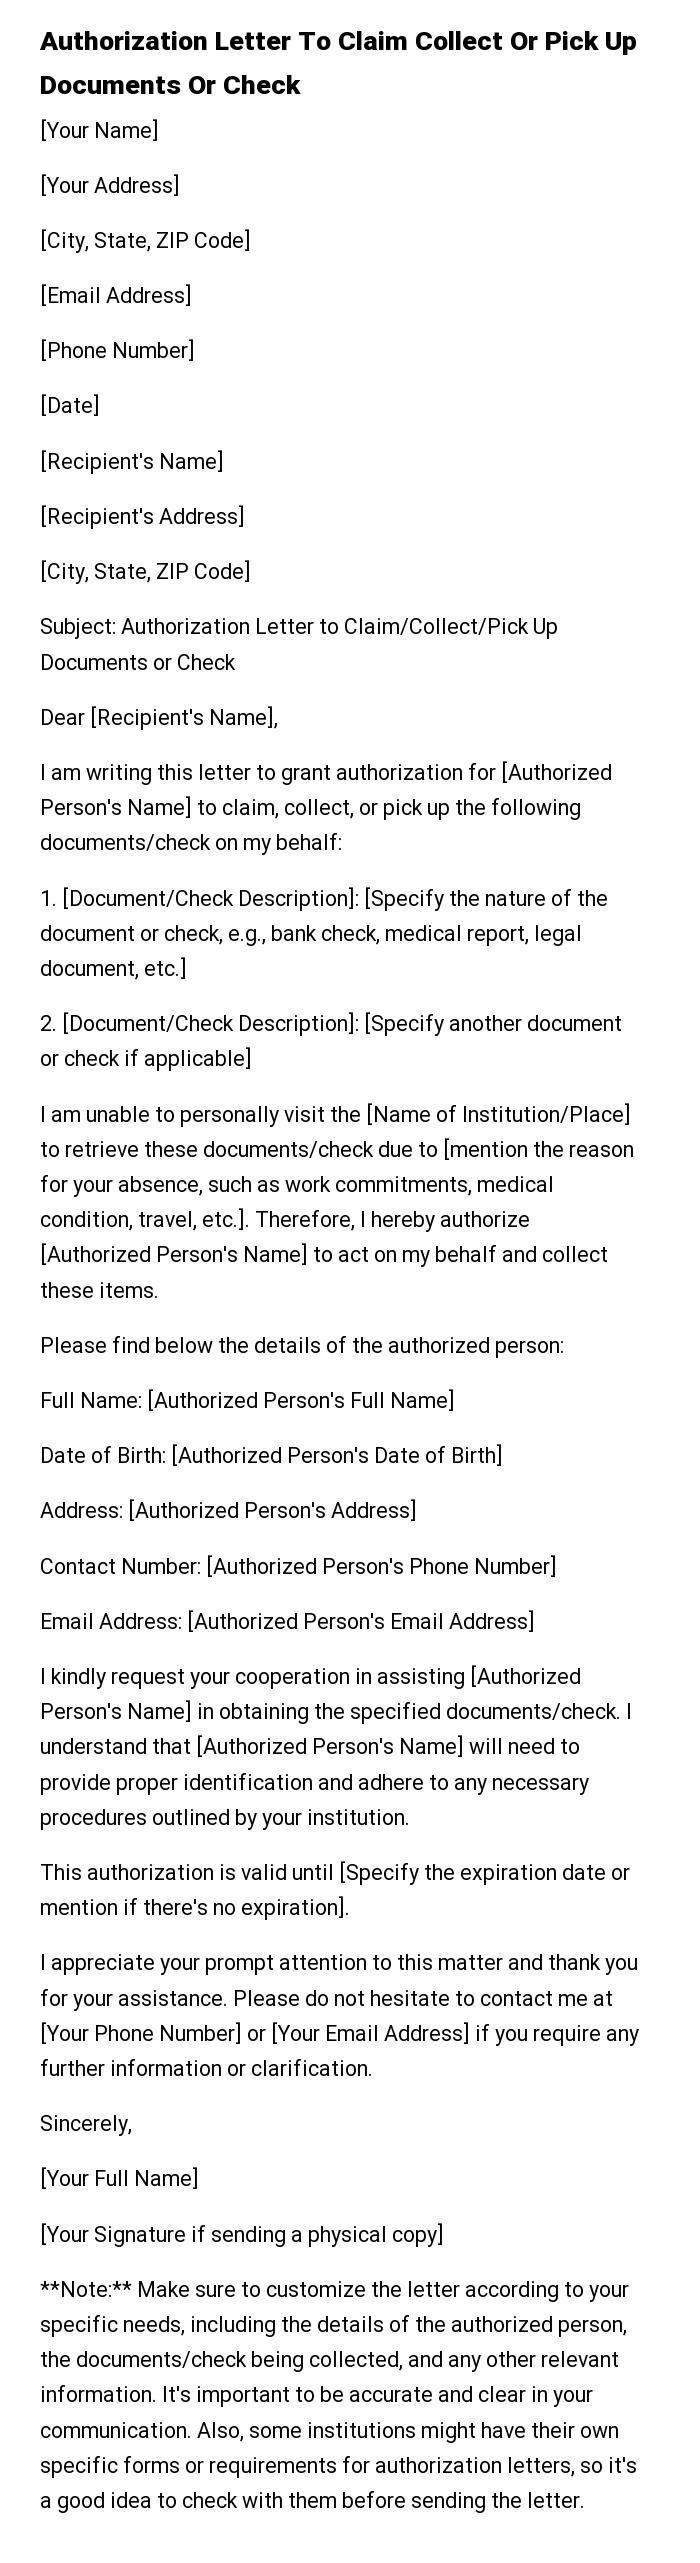 Authorization Letter To Claim Collect Or Pick Up Documents Or Check